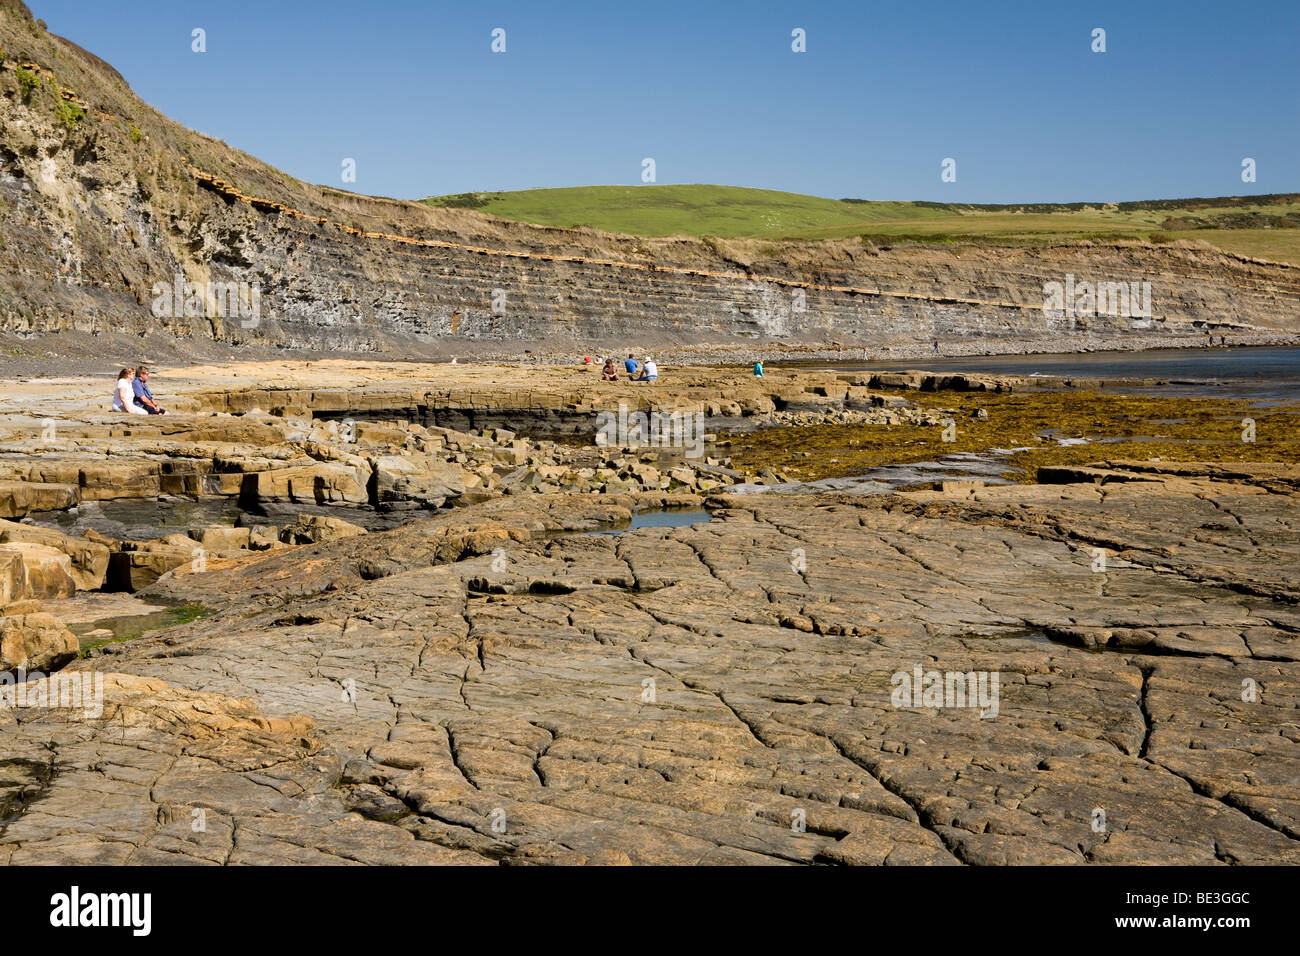 Dolomite rock formations at Kimmeridge Bay on the Isle of Purbeck, on the Dorset coast of England Stock Photo